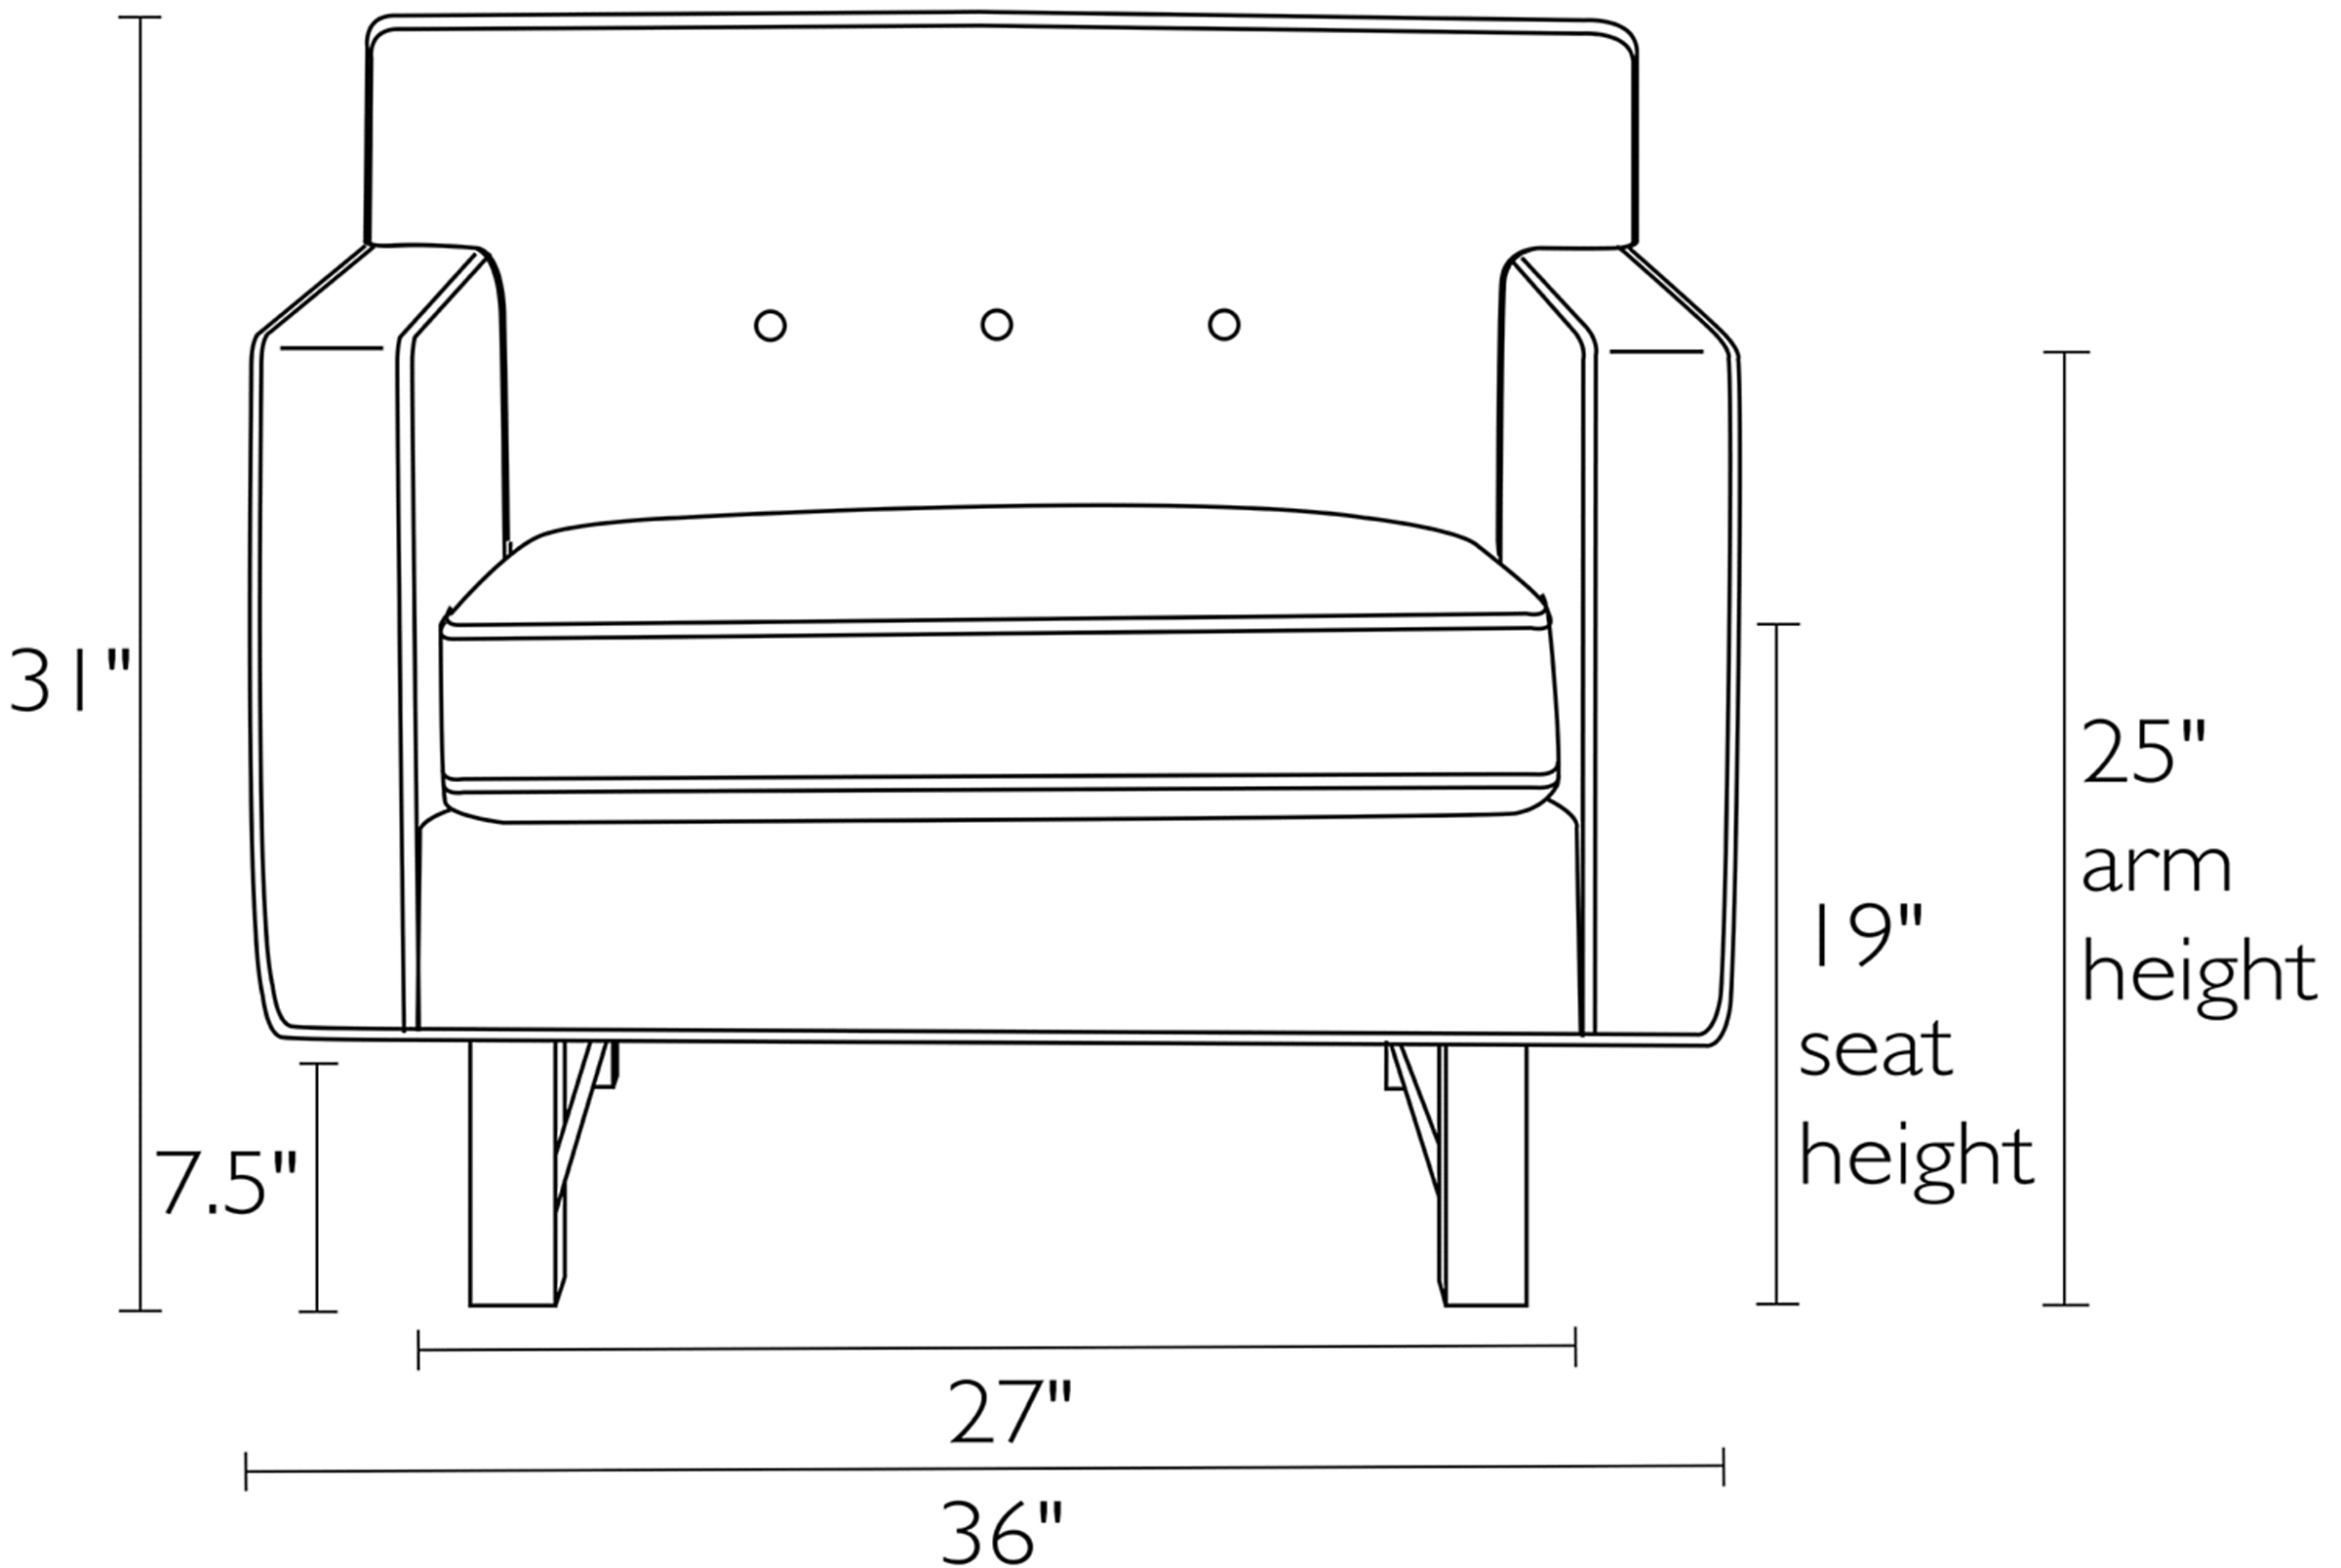 Front view dimension illustration of Andre chair.